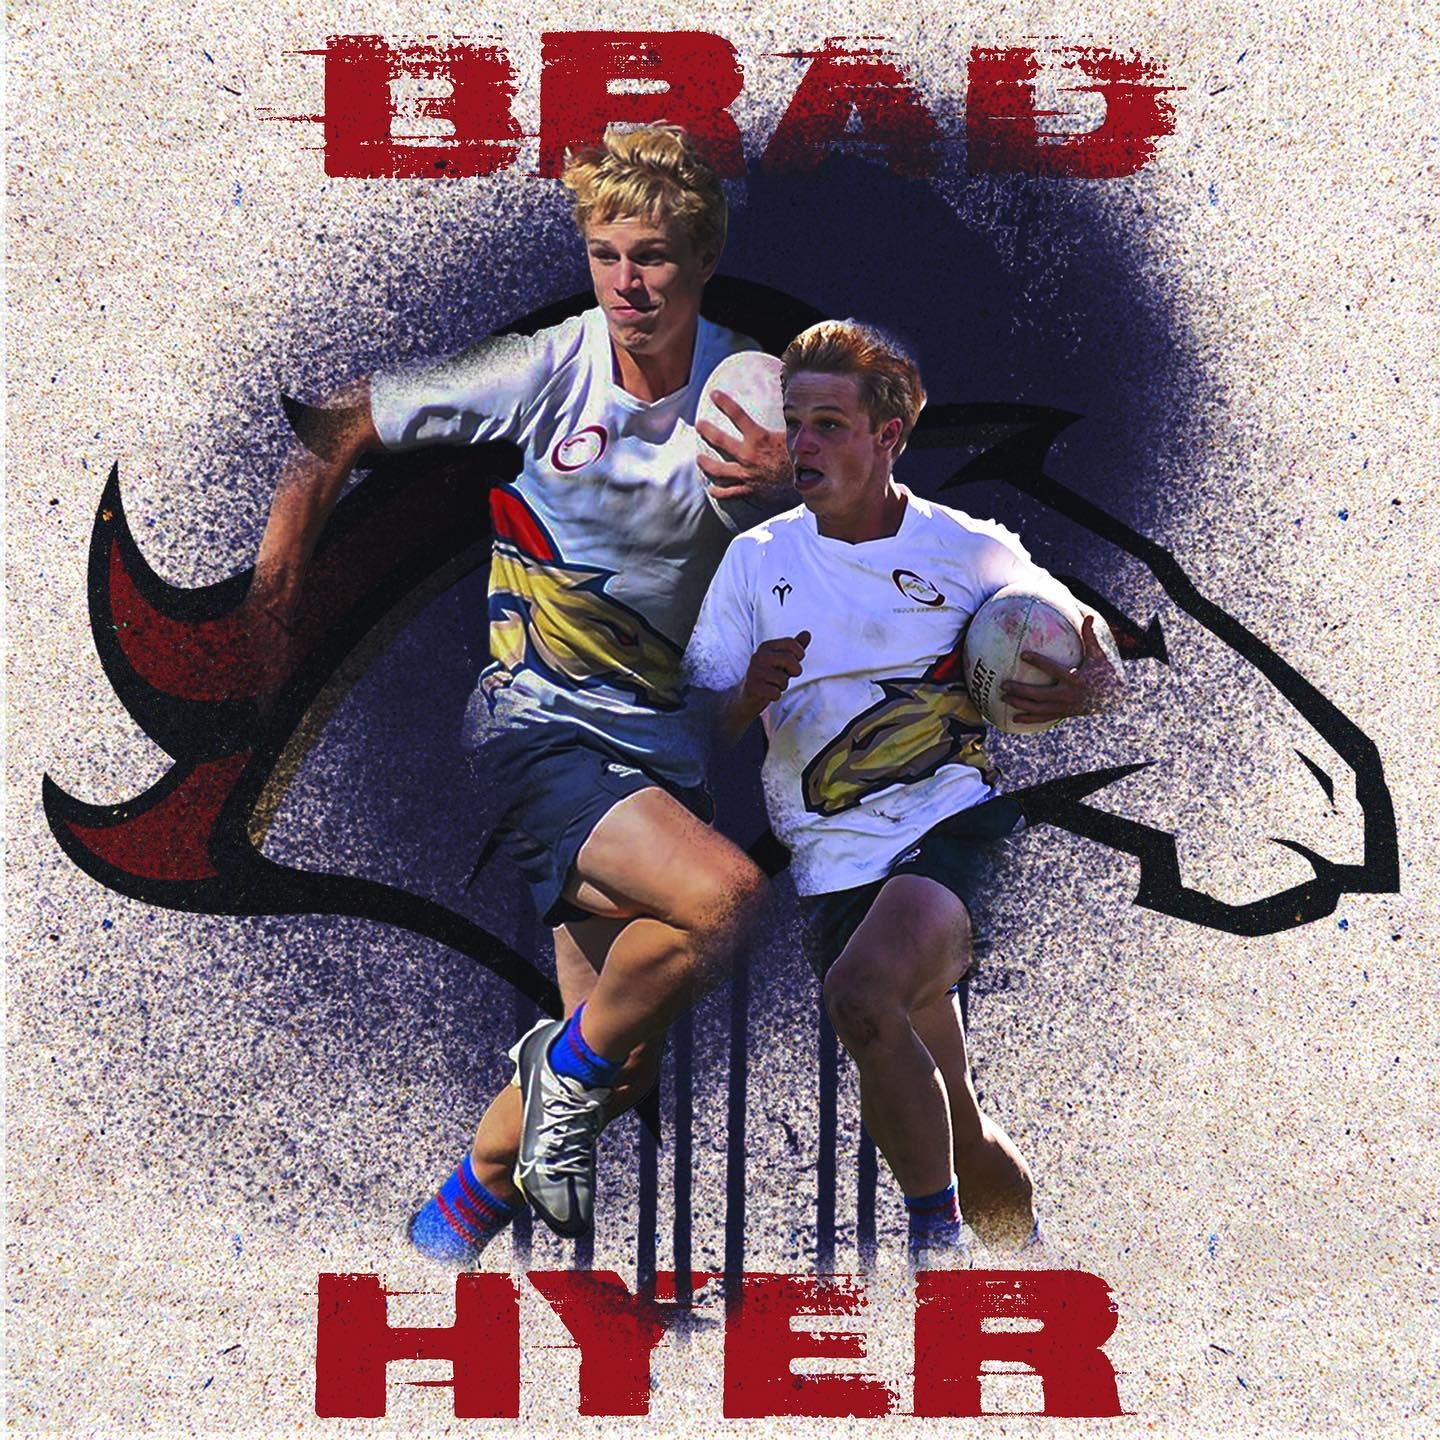 We find ourselves humbled and forever grateful for the dedication of these young men to the Herriman Rugby program. Their commitment and their sacrifices will be felt well beyond the boundaries of the game and will help shape the future generations y